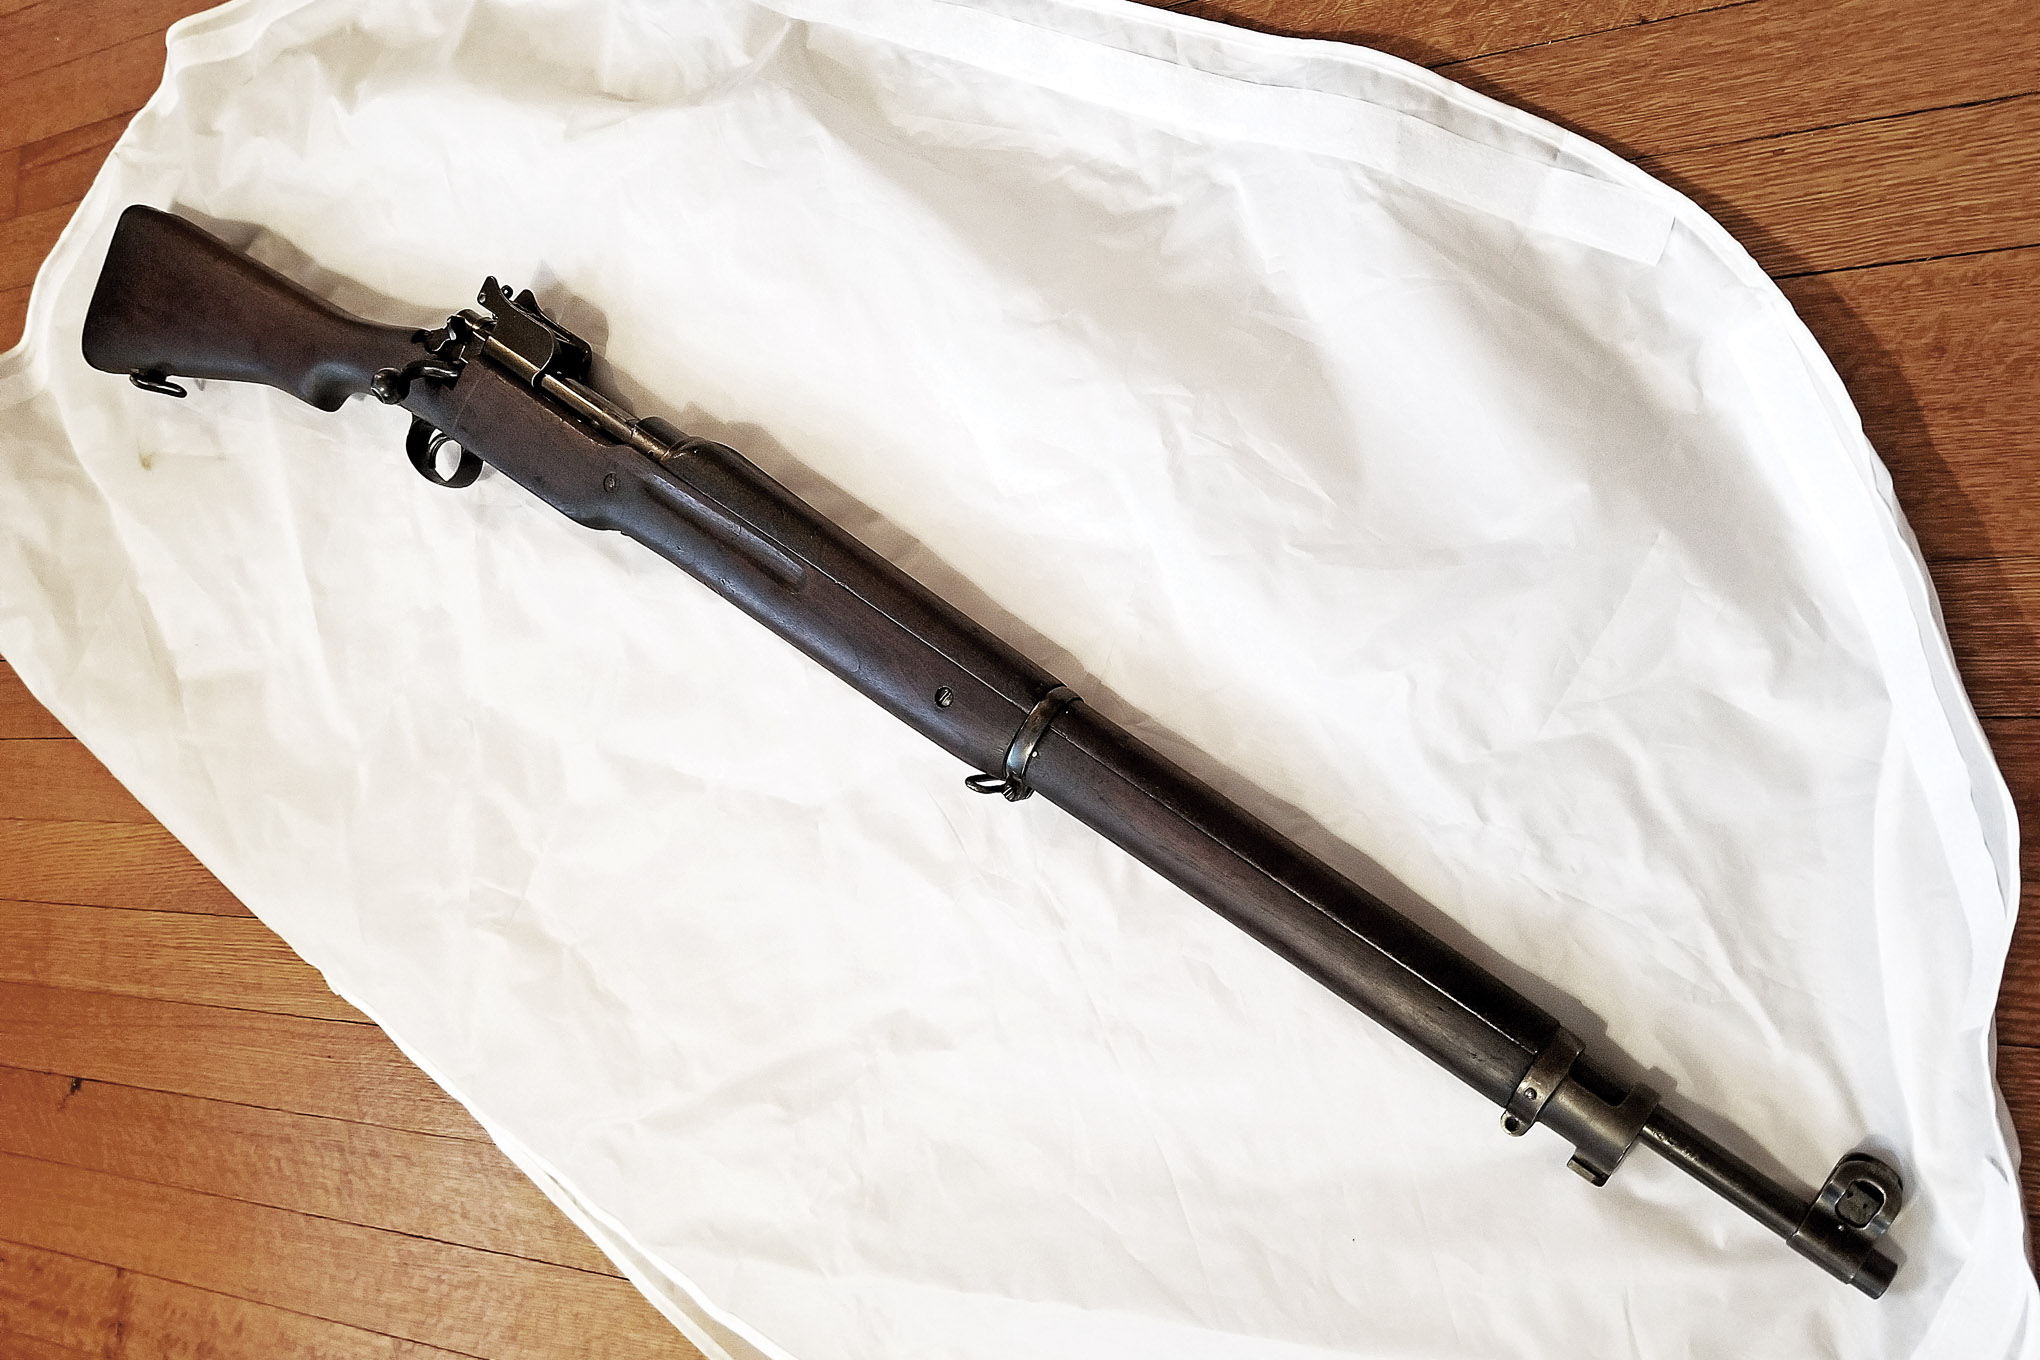 https://www.recoilweb.com/wp-content/uploads/2021/11/P14-Enfield-Rifle-Cover.jpg